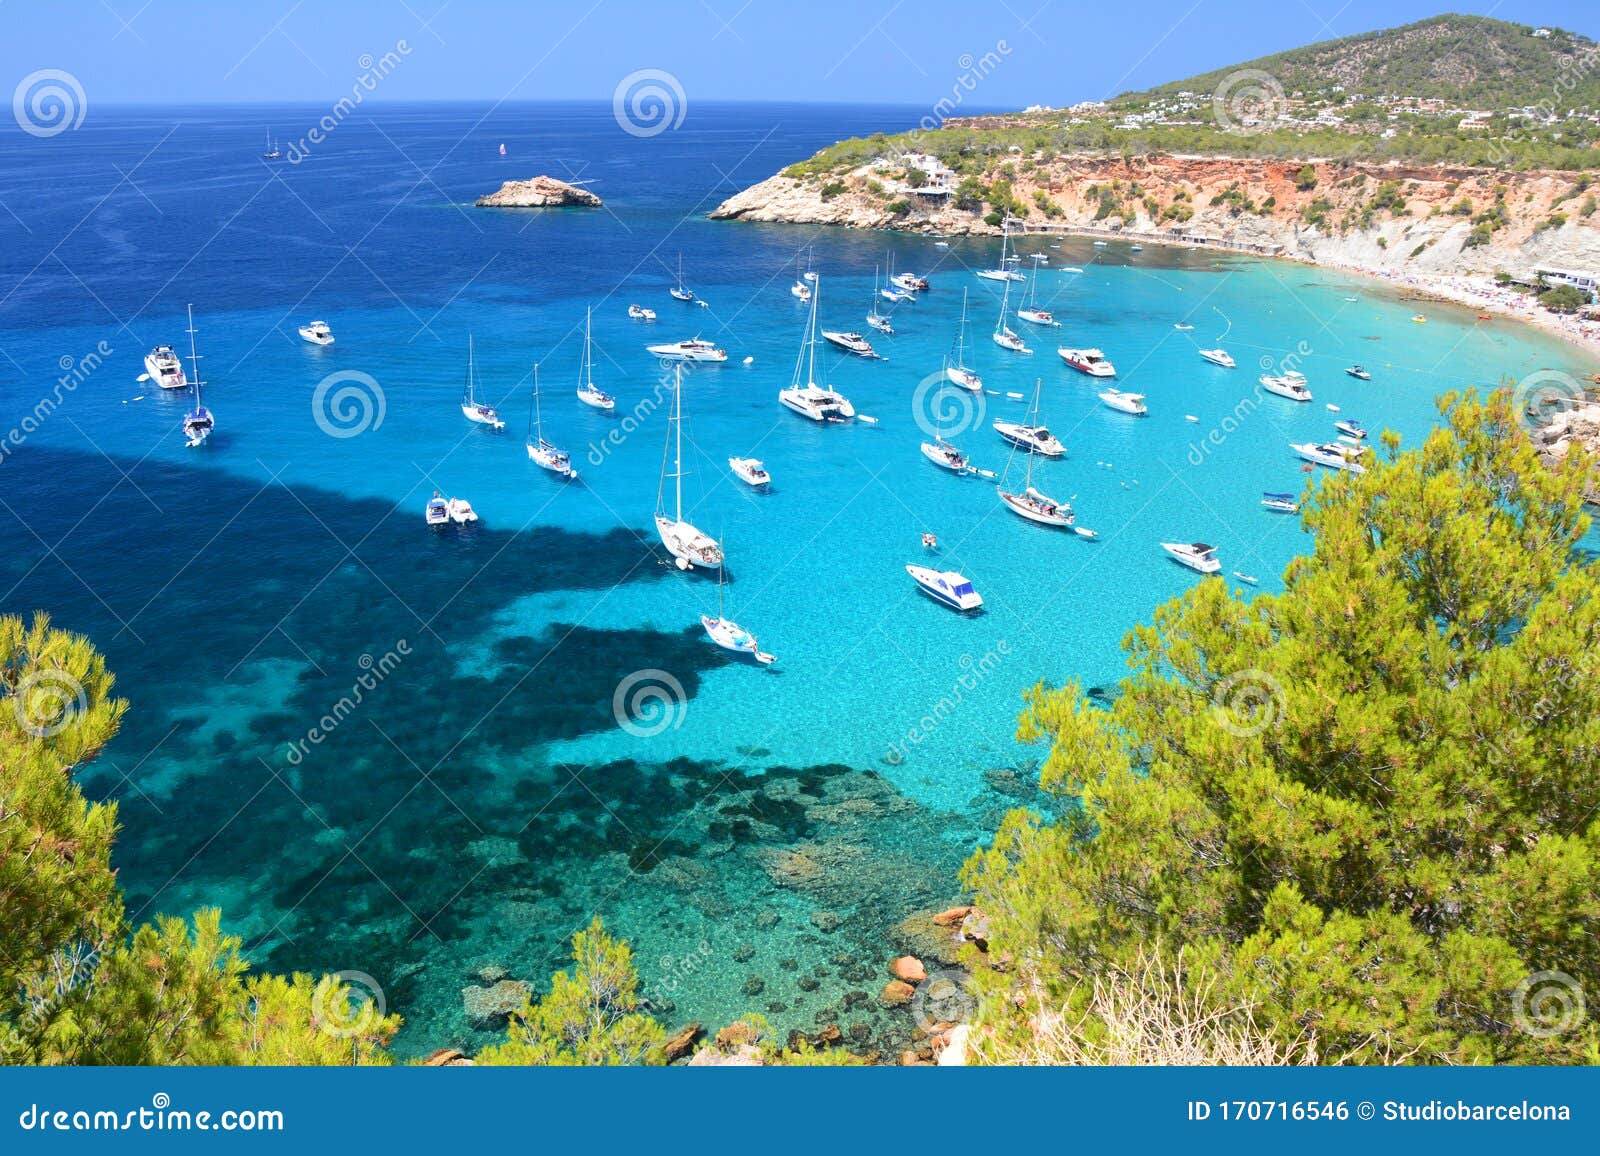 cala d`hort bay with beach and turquoise water on ibiza